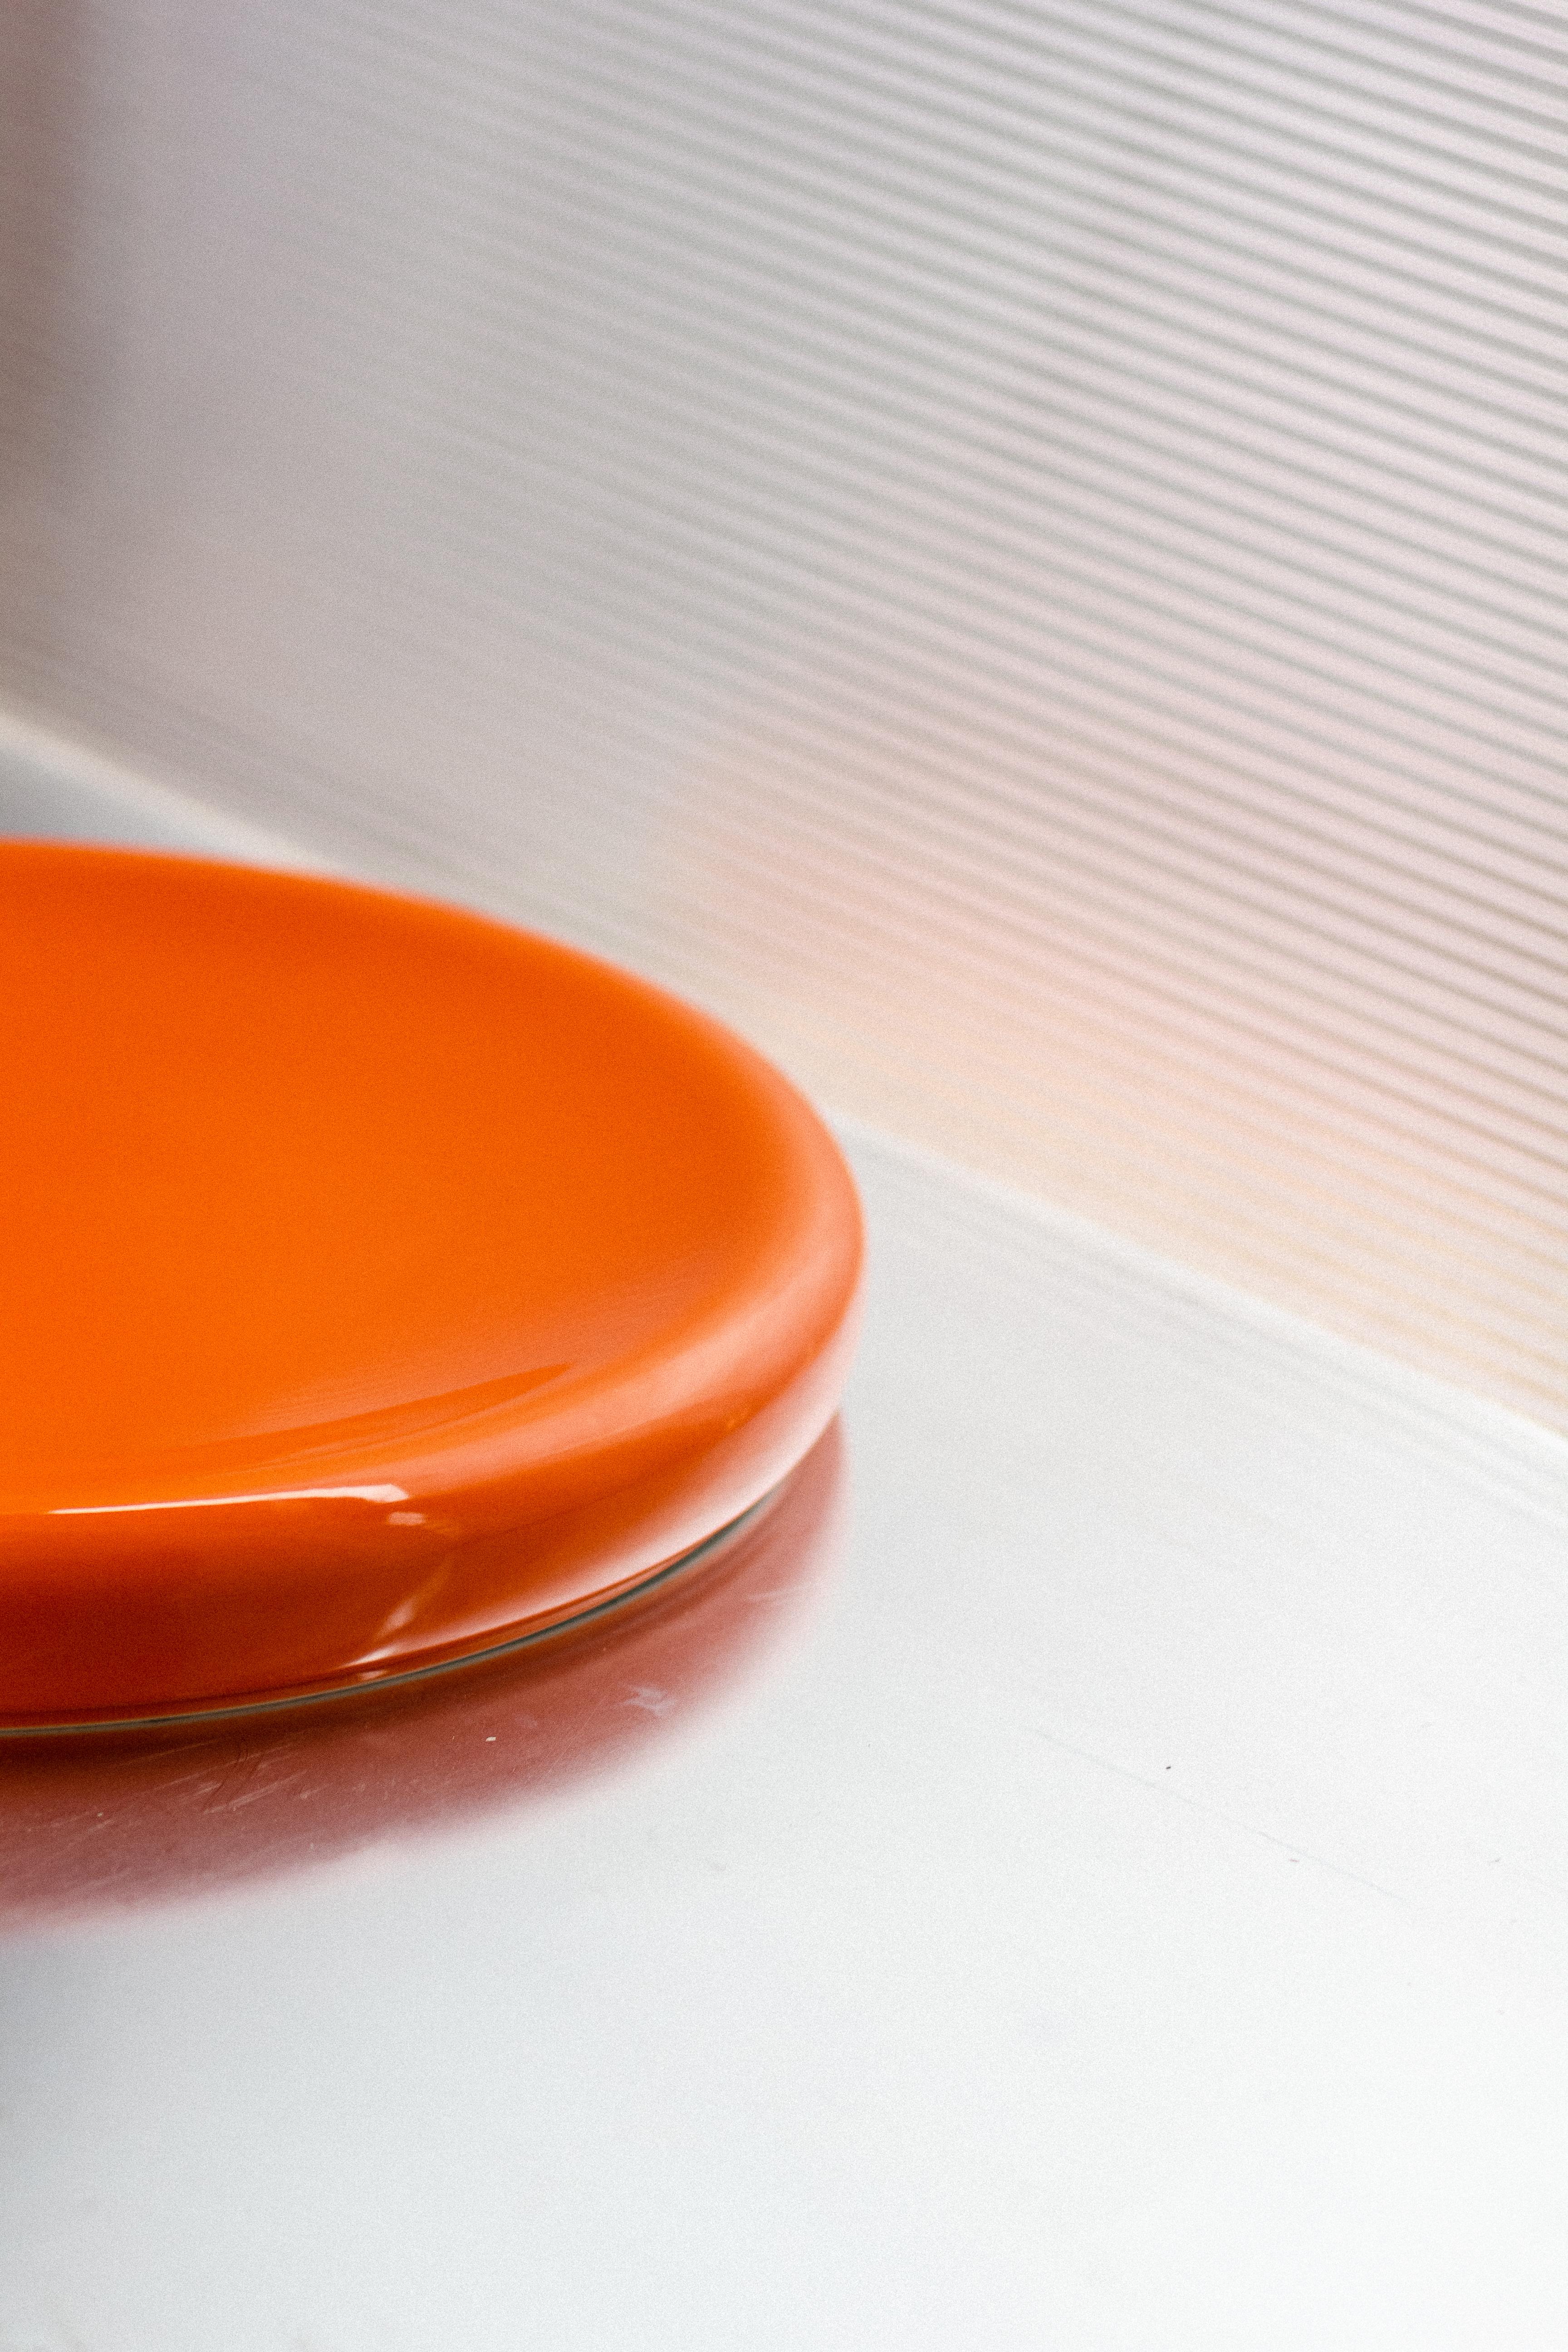 Big O plate is a big rounded deeply glazed porcelain serving platter. 

The platter is intended to be used to serve food or if you like as a display on your table etc.
In this first edition, we make it in a bold orange and a more subtle sand